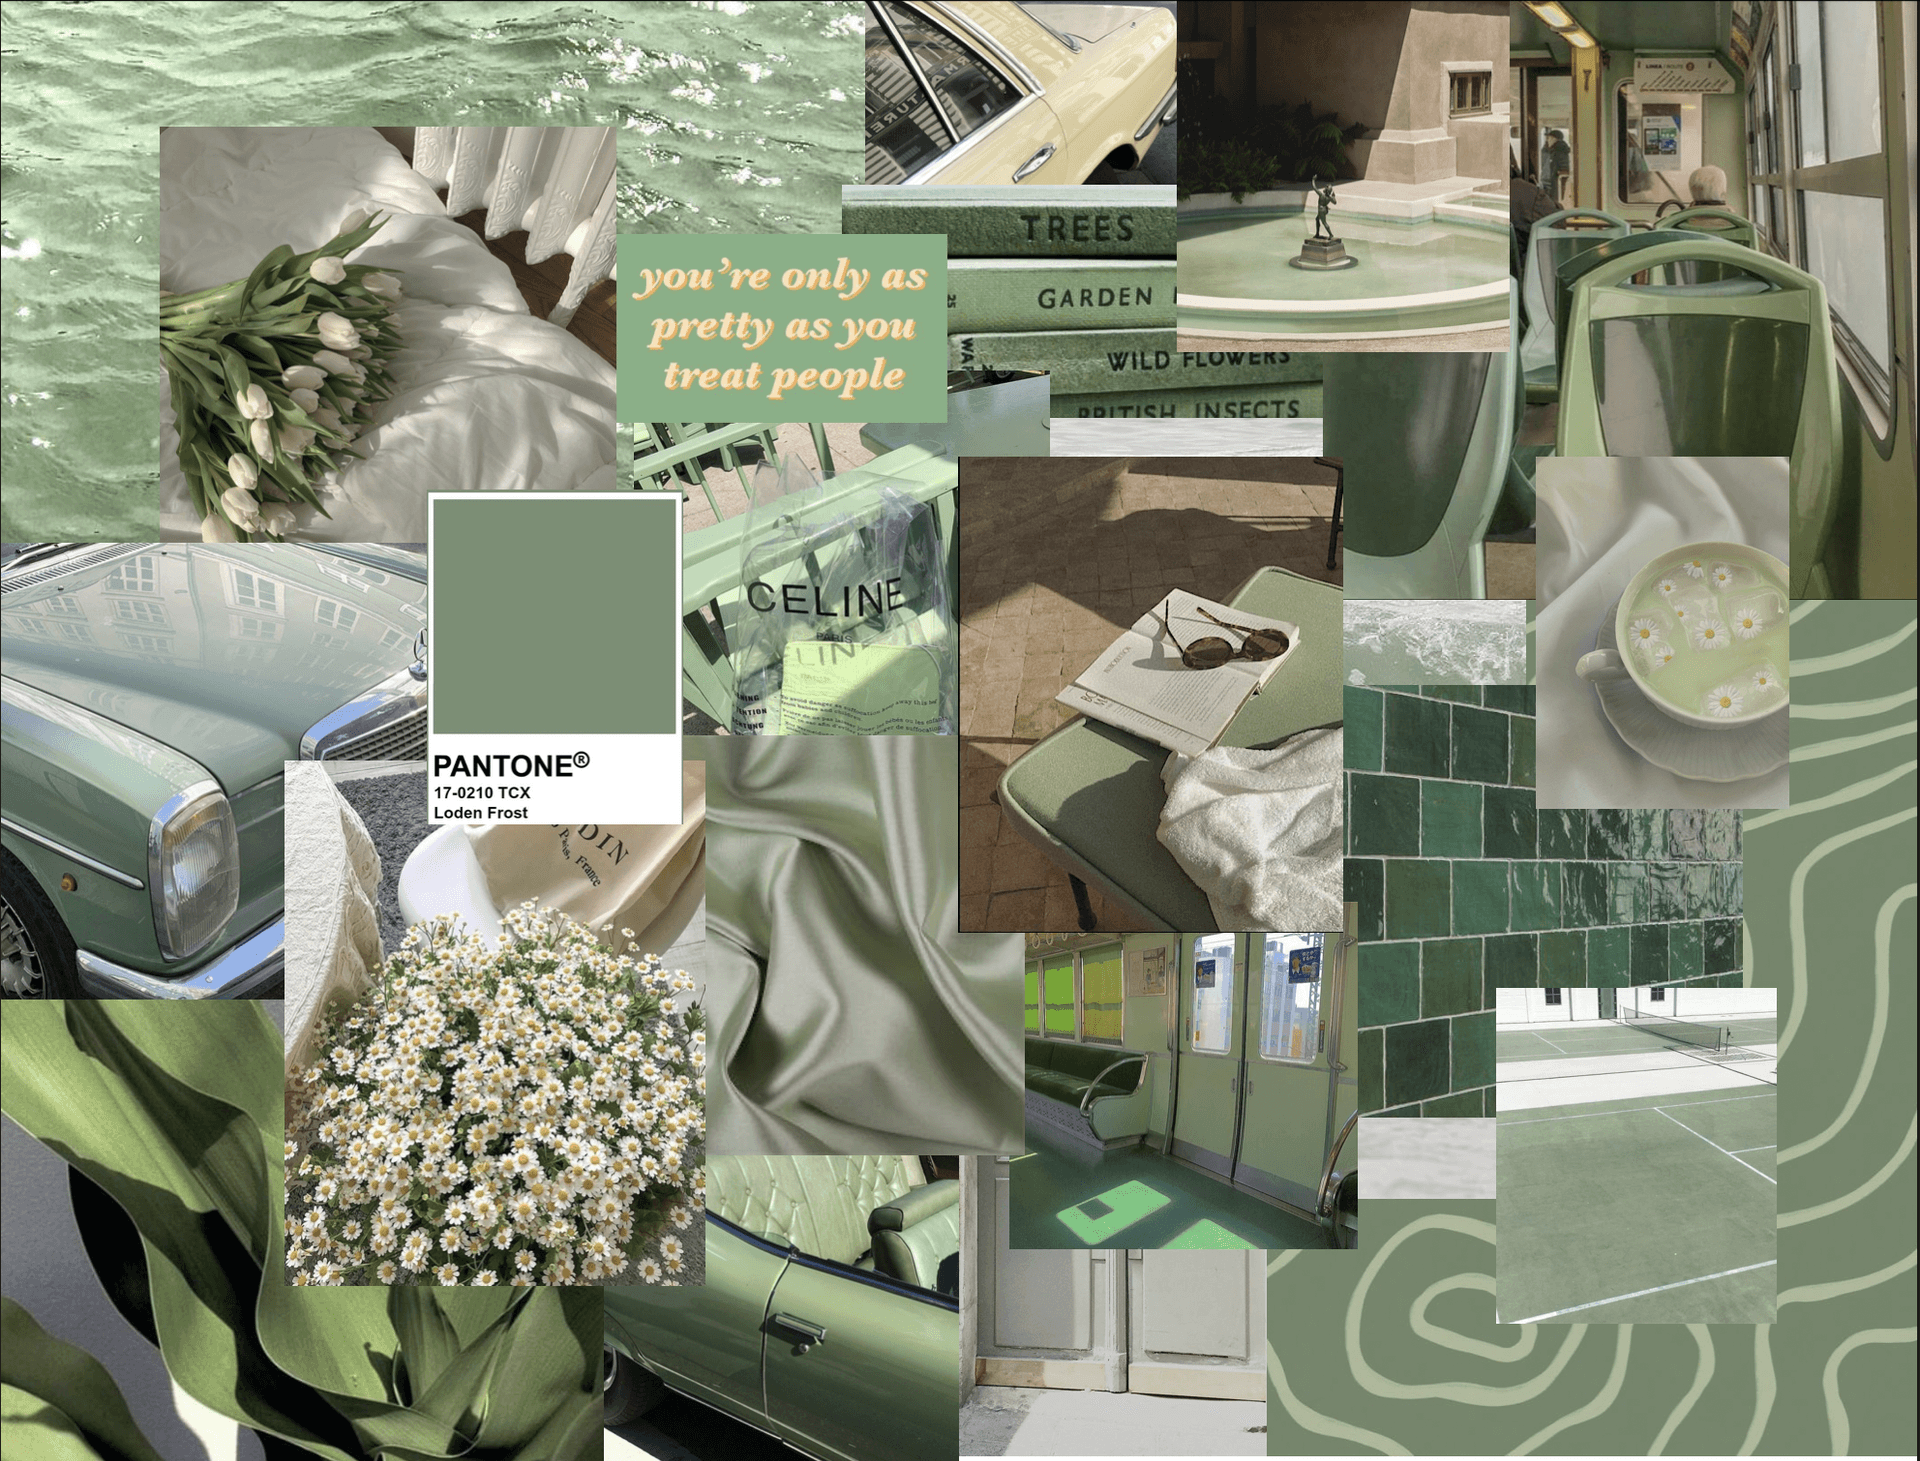 100 Sage Green Aesthetic Backgrounds